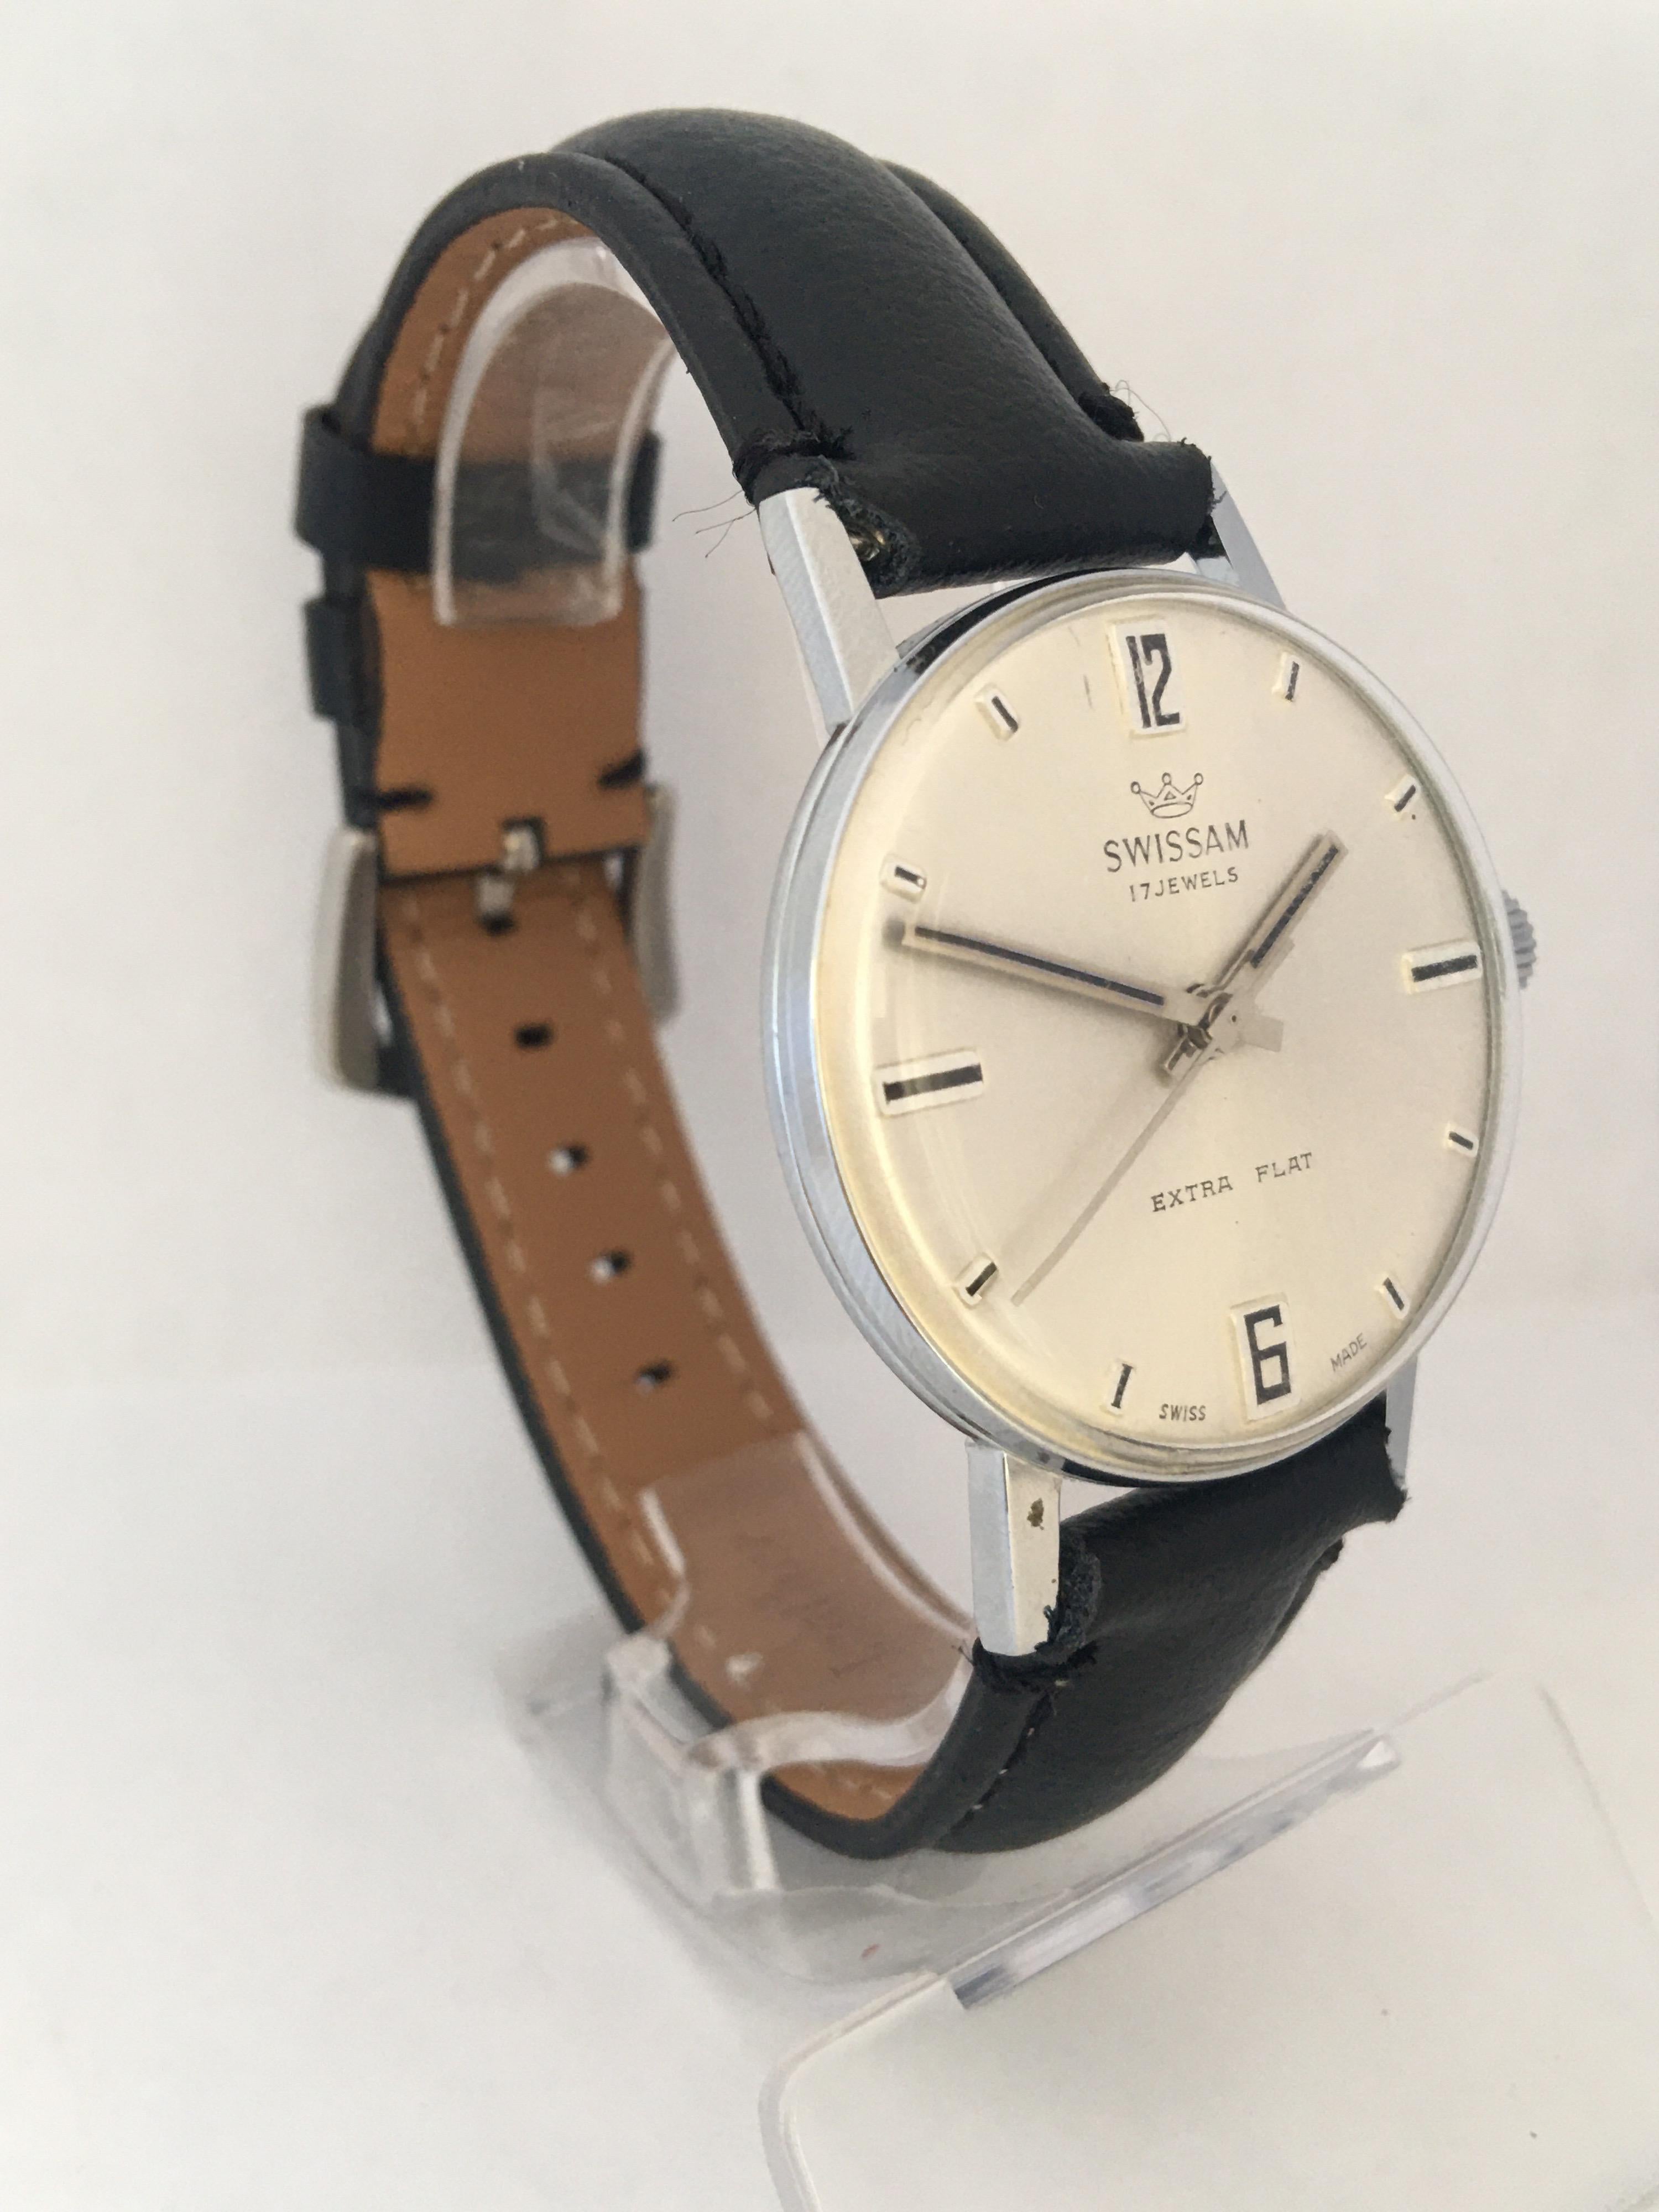 This classic pre-owned 34mm diameter hand winding watch is in good working condition and it is running well. Beautiful silvered finished dial and it’s watch case and it is fitted with new black leather strap as shown. 

Please study the images